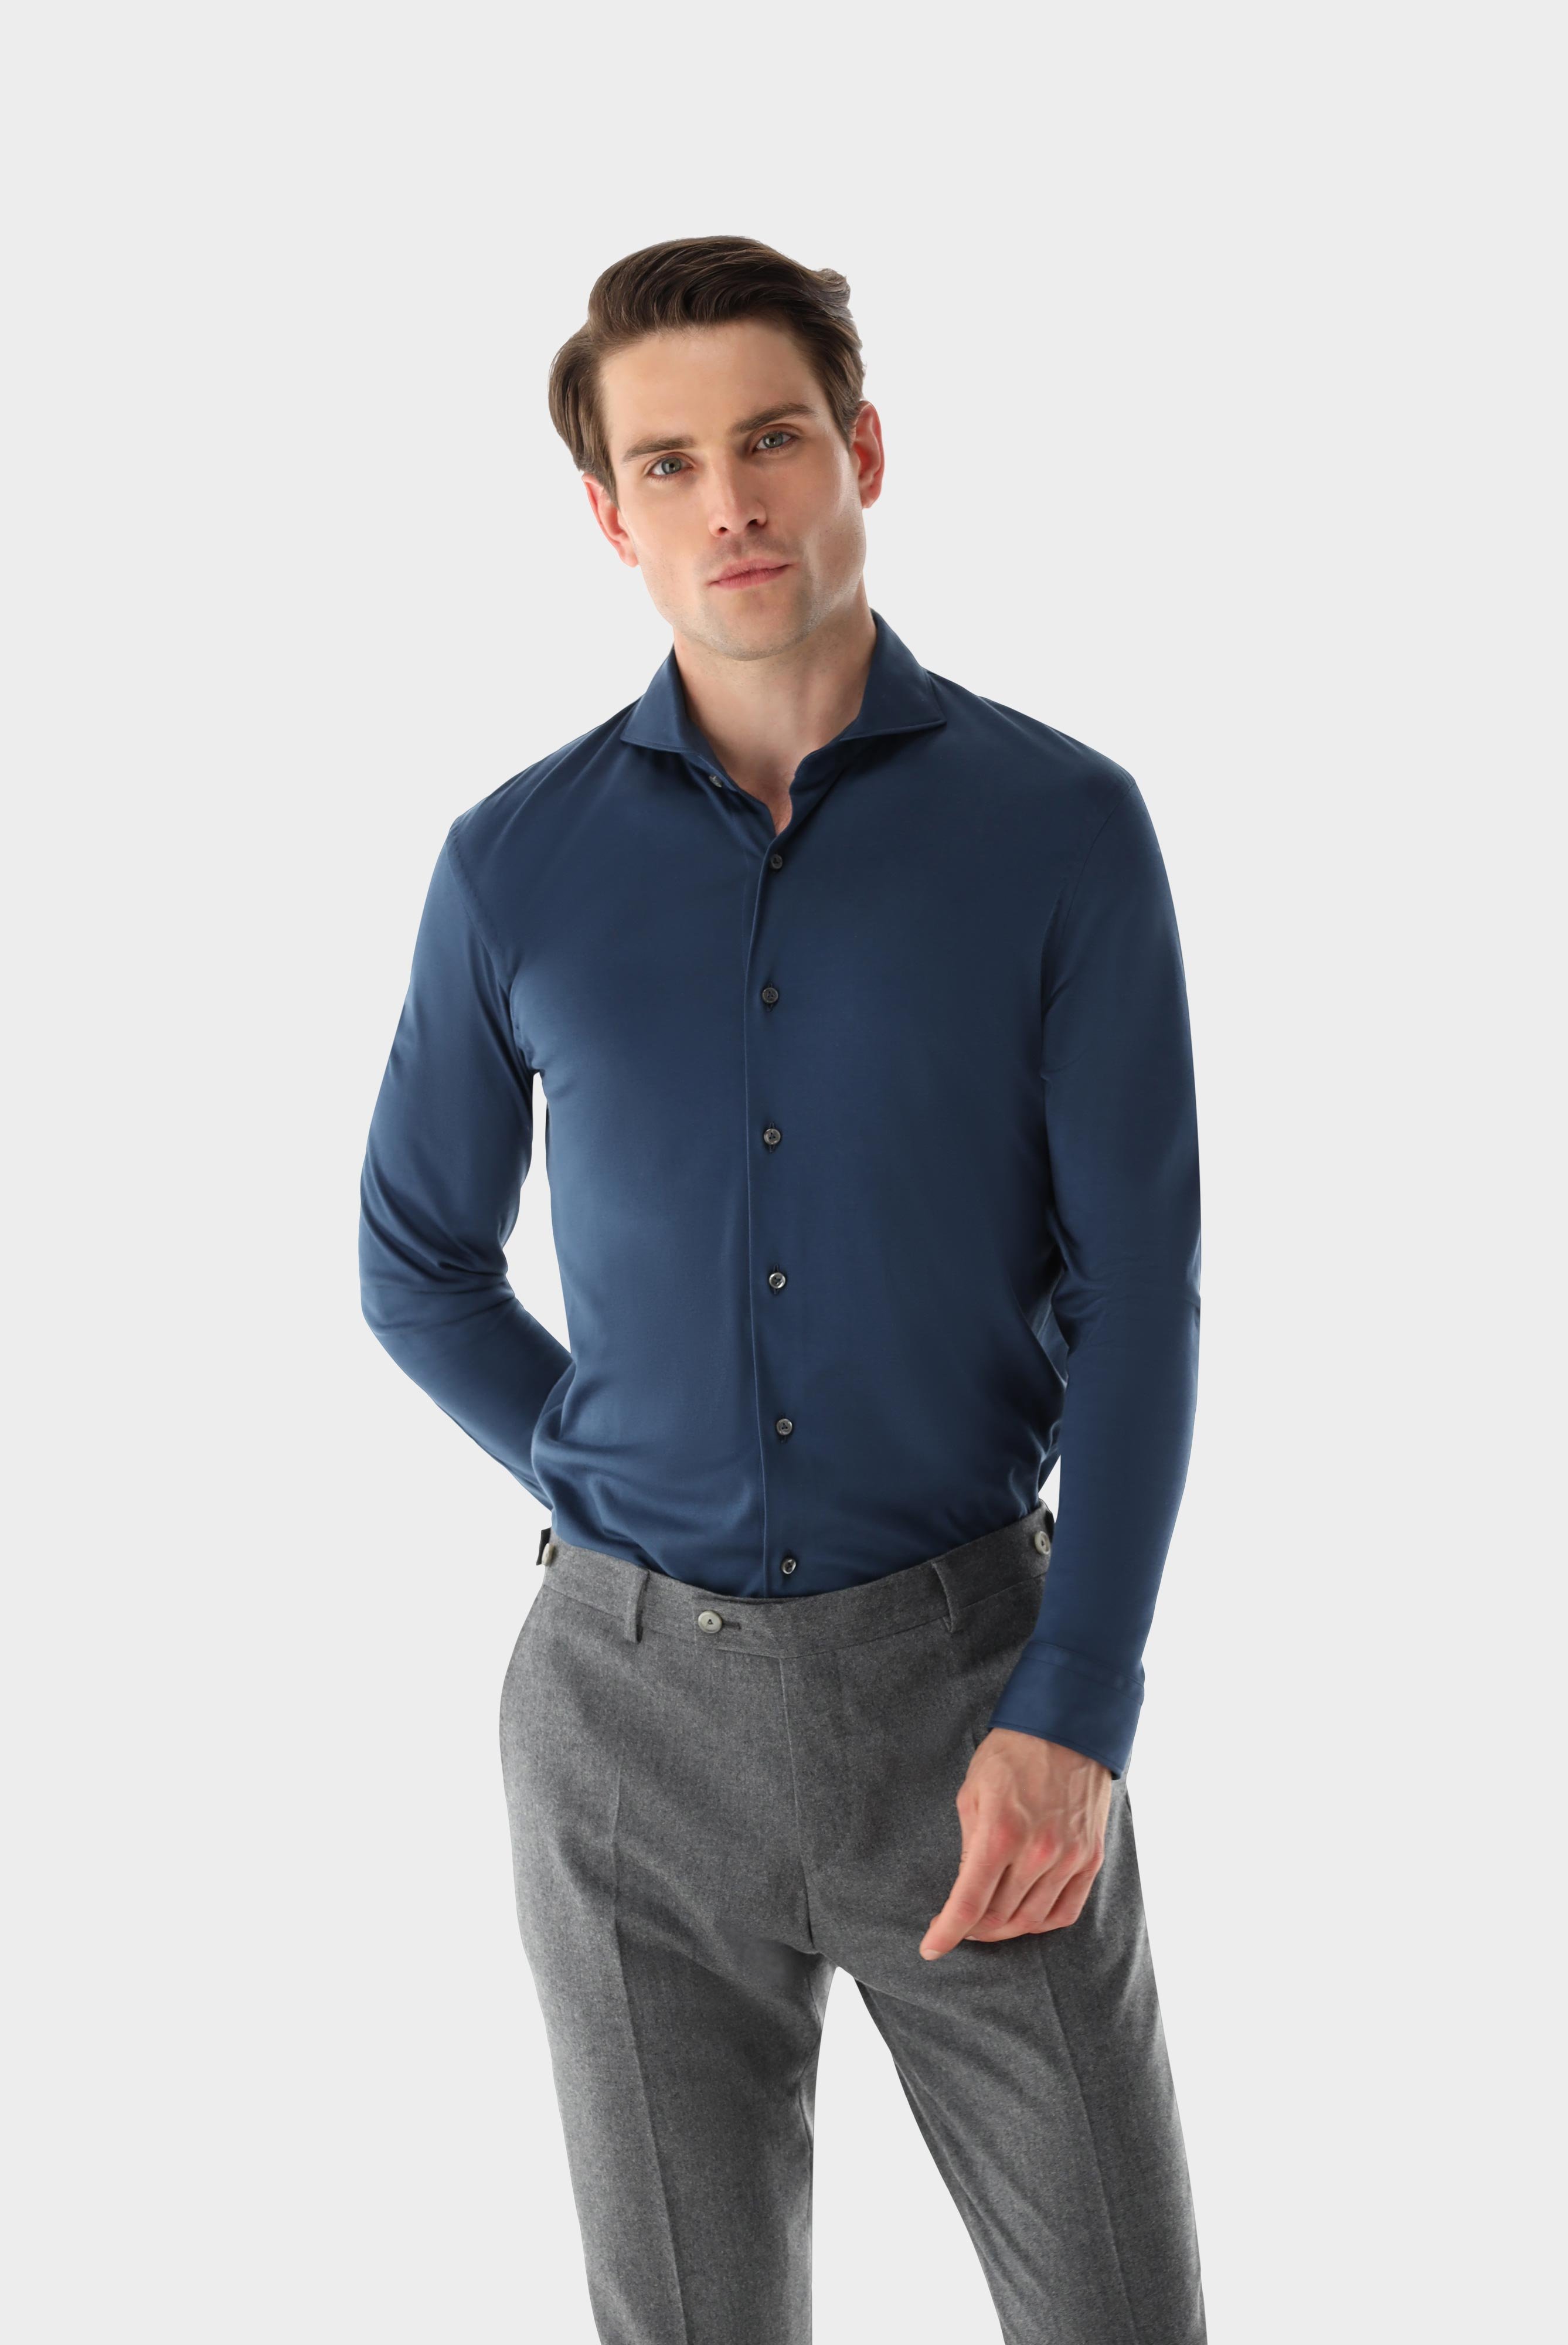 Casual Shirts+Jersey Shirt Swiss Cotton Tailor Fit+20.1683.UC.180031.780.L